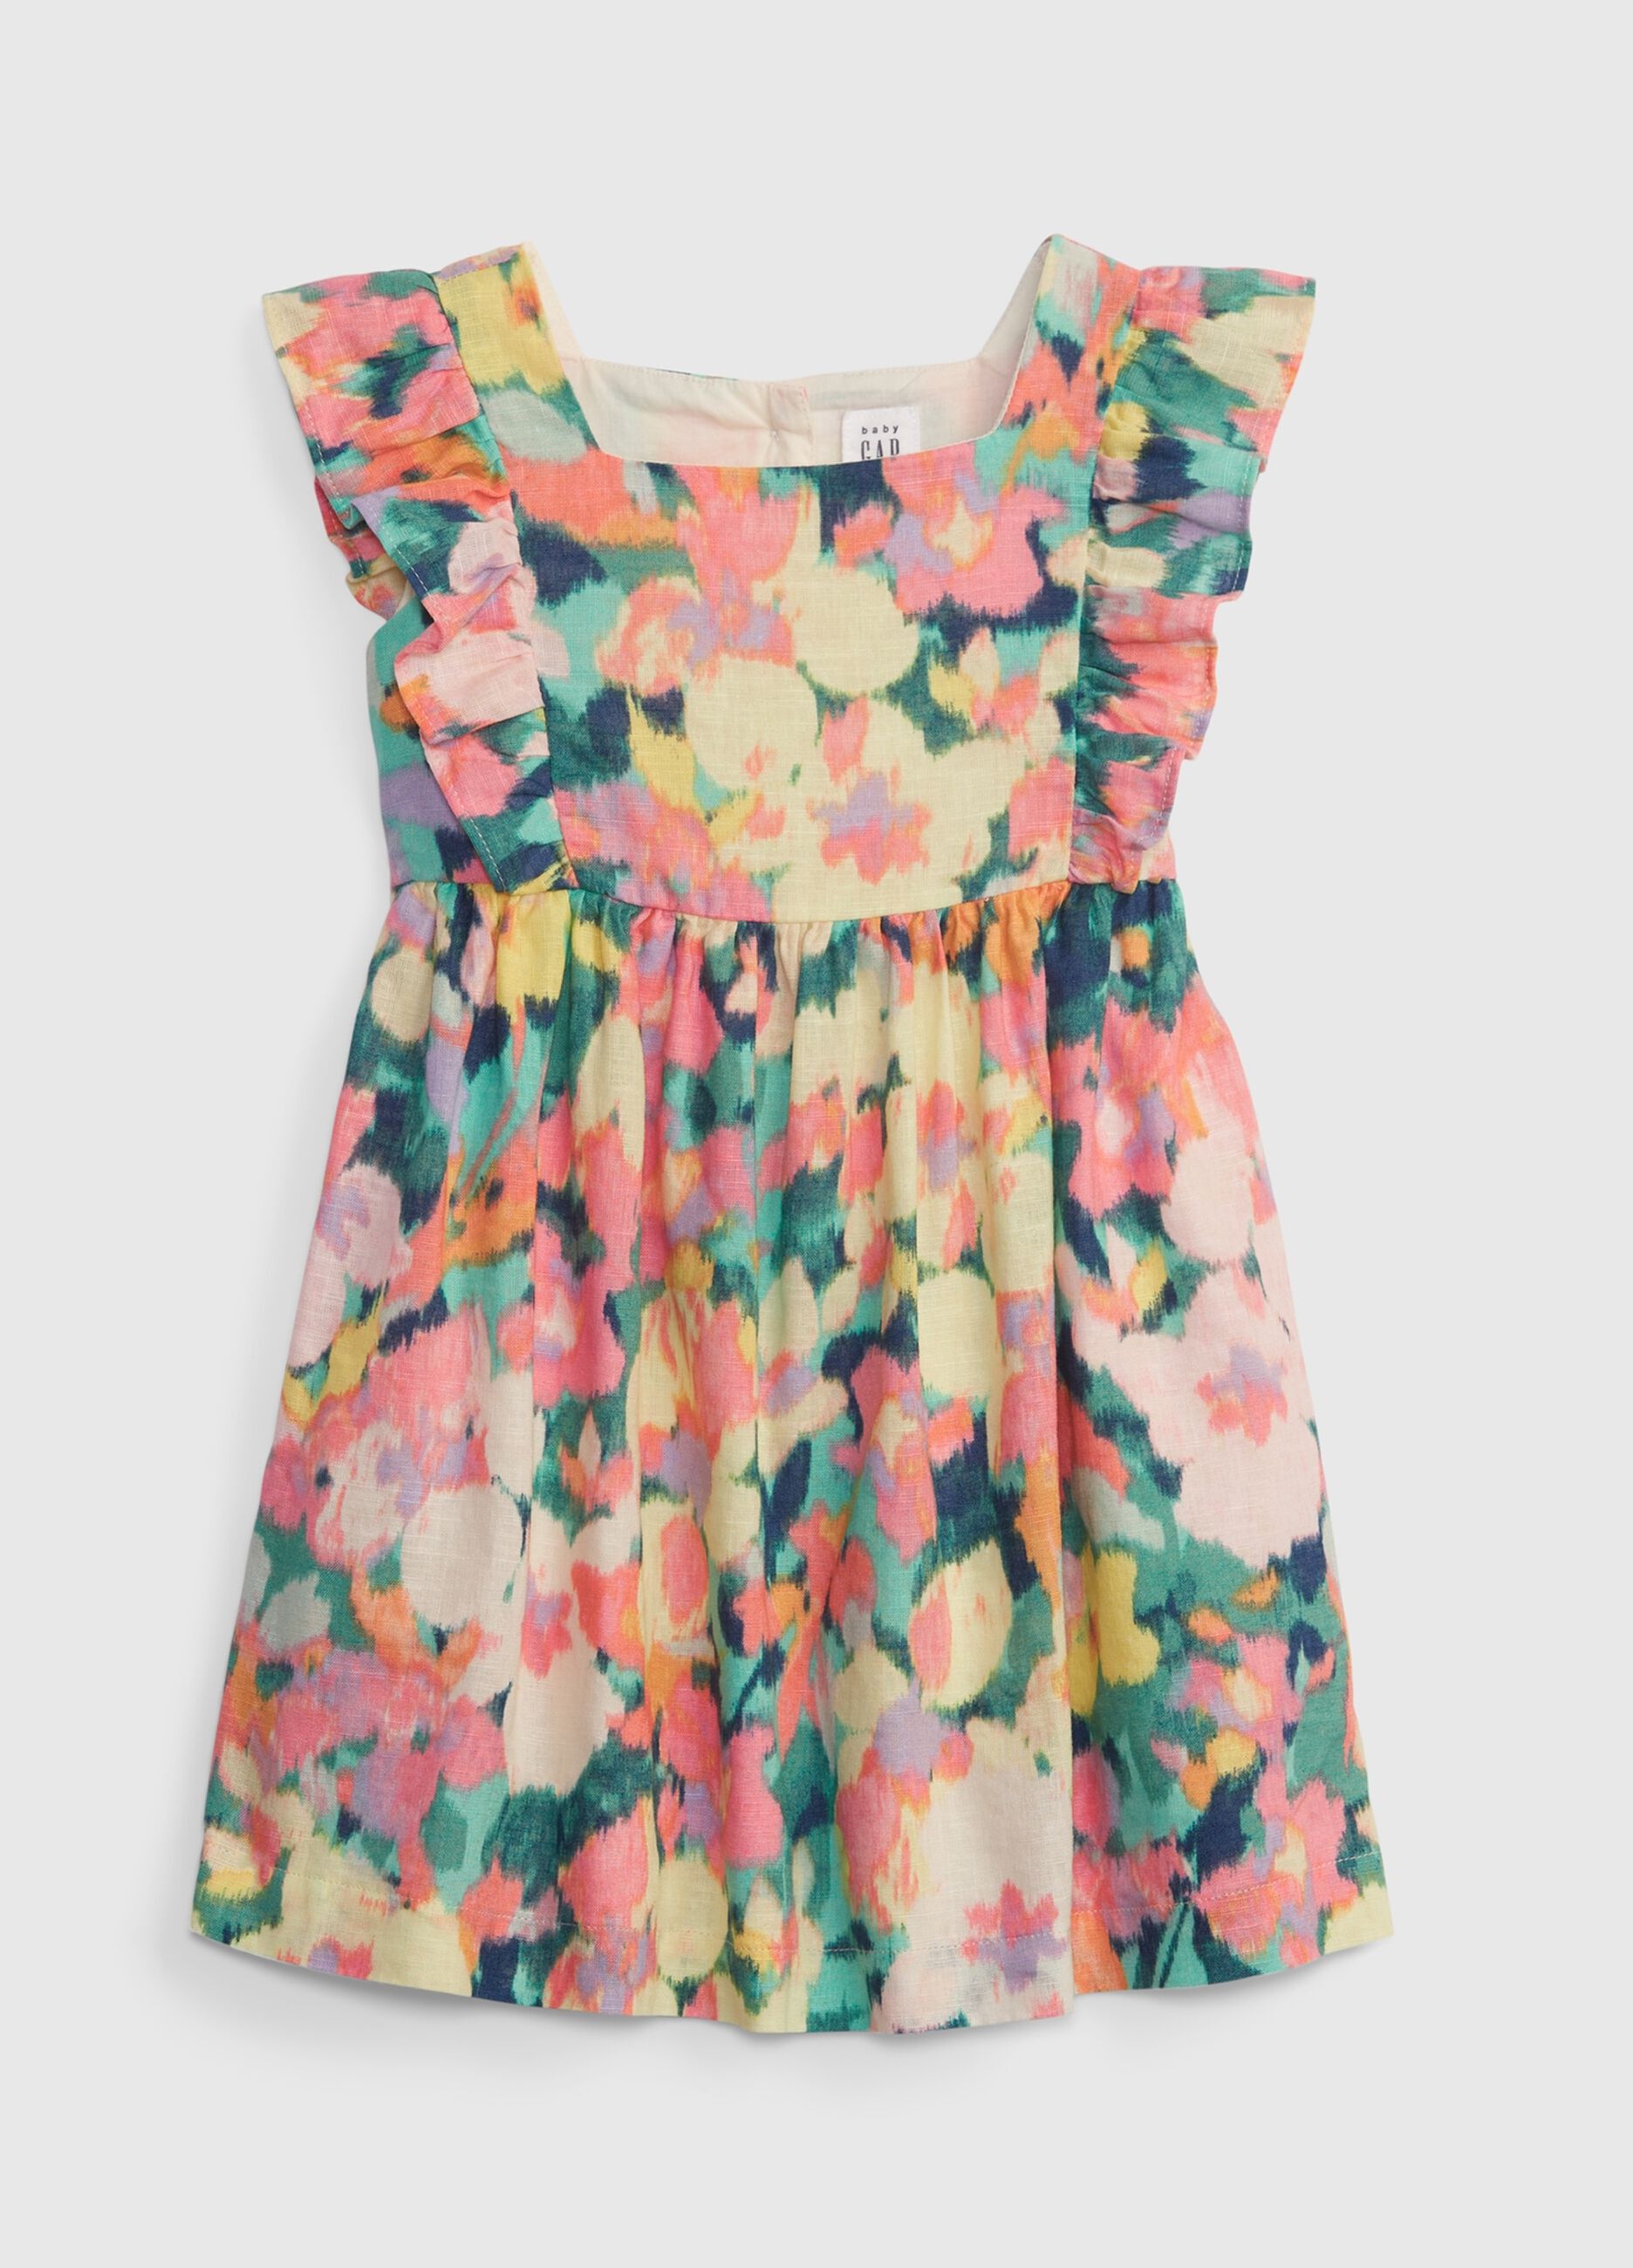 Floral dress in linen and cotton